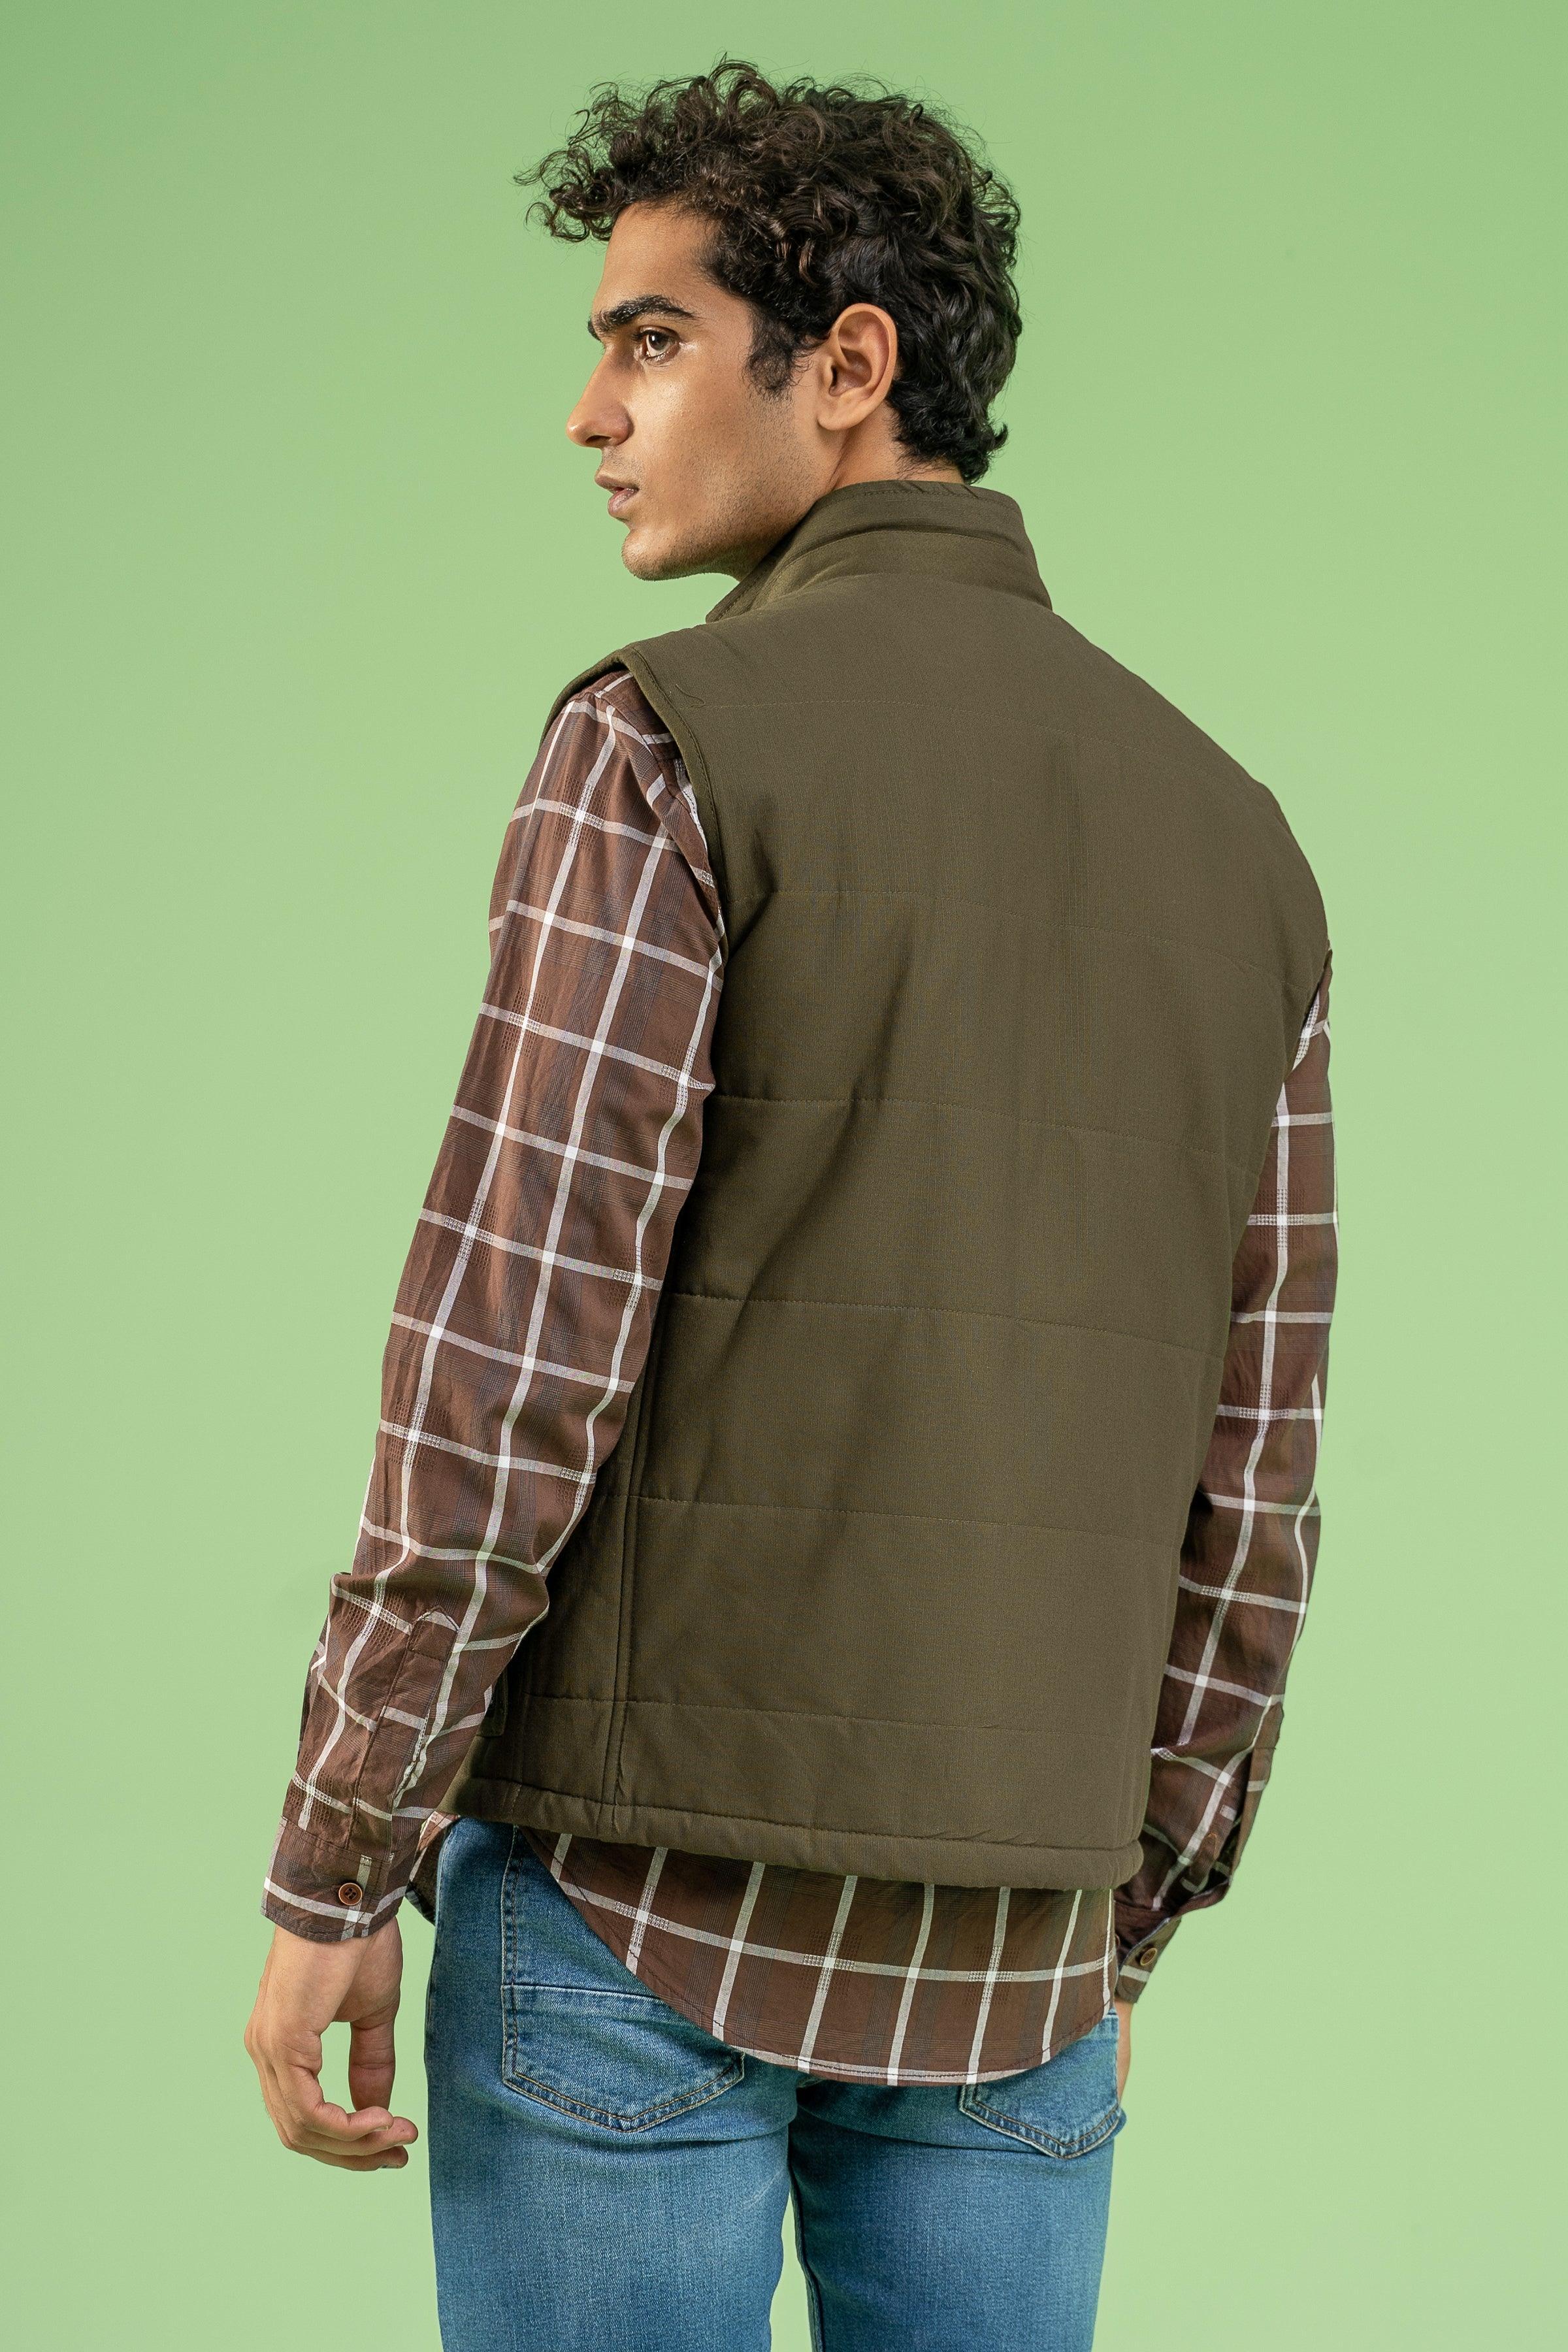 SLEEVESLESS RIPSTOP QUILTED JACKET DARK OLIVE at Charcoal Clothing